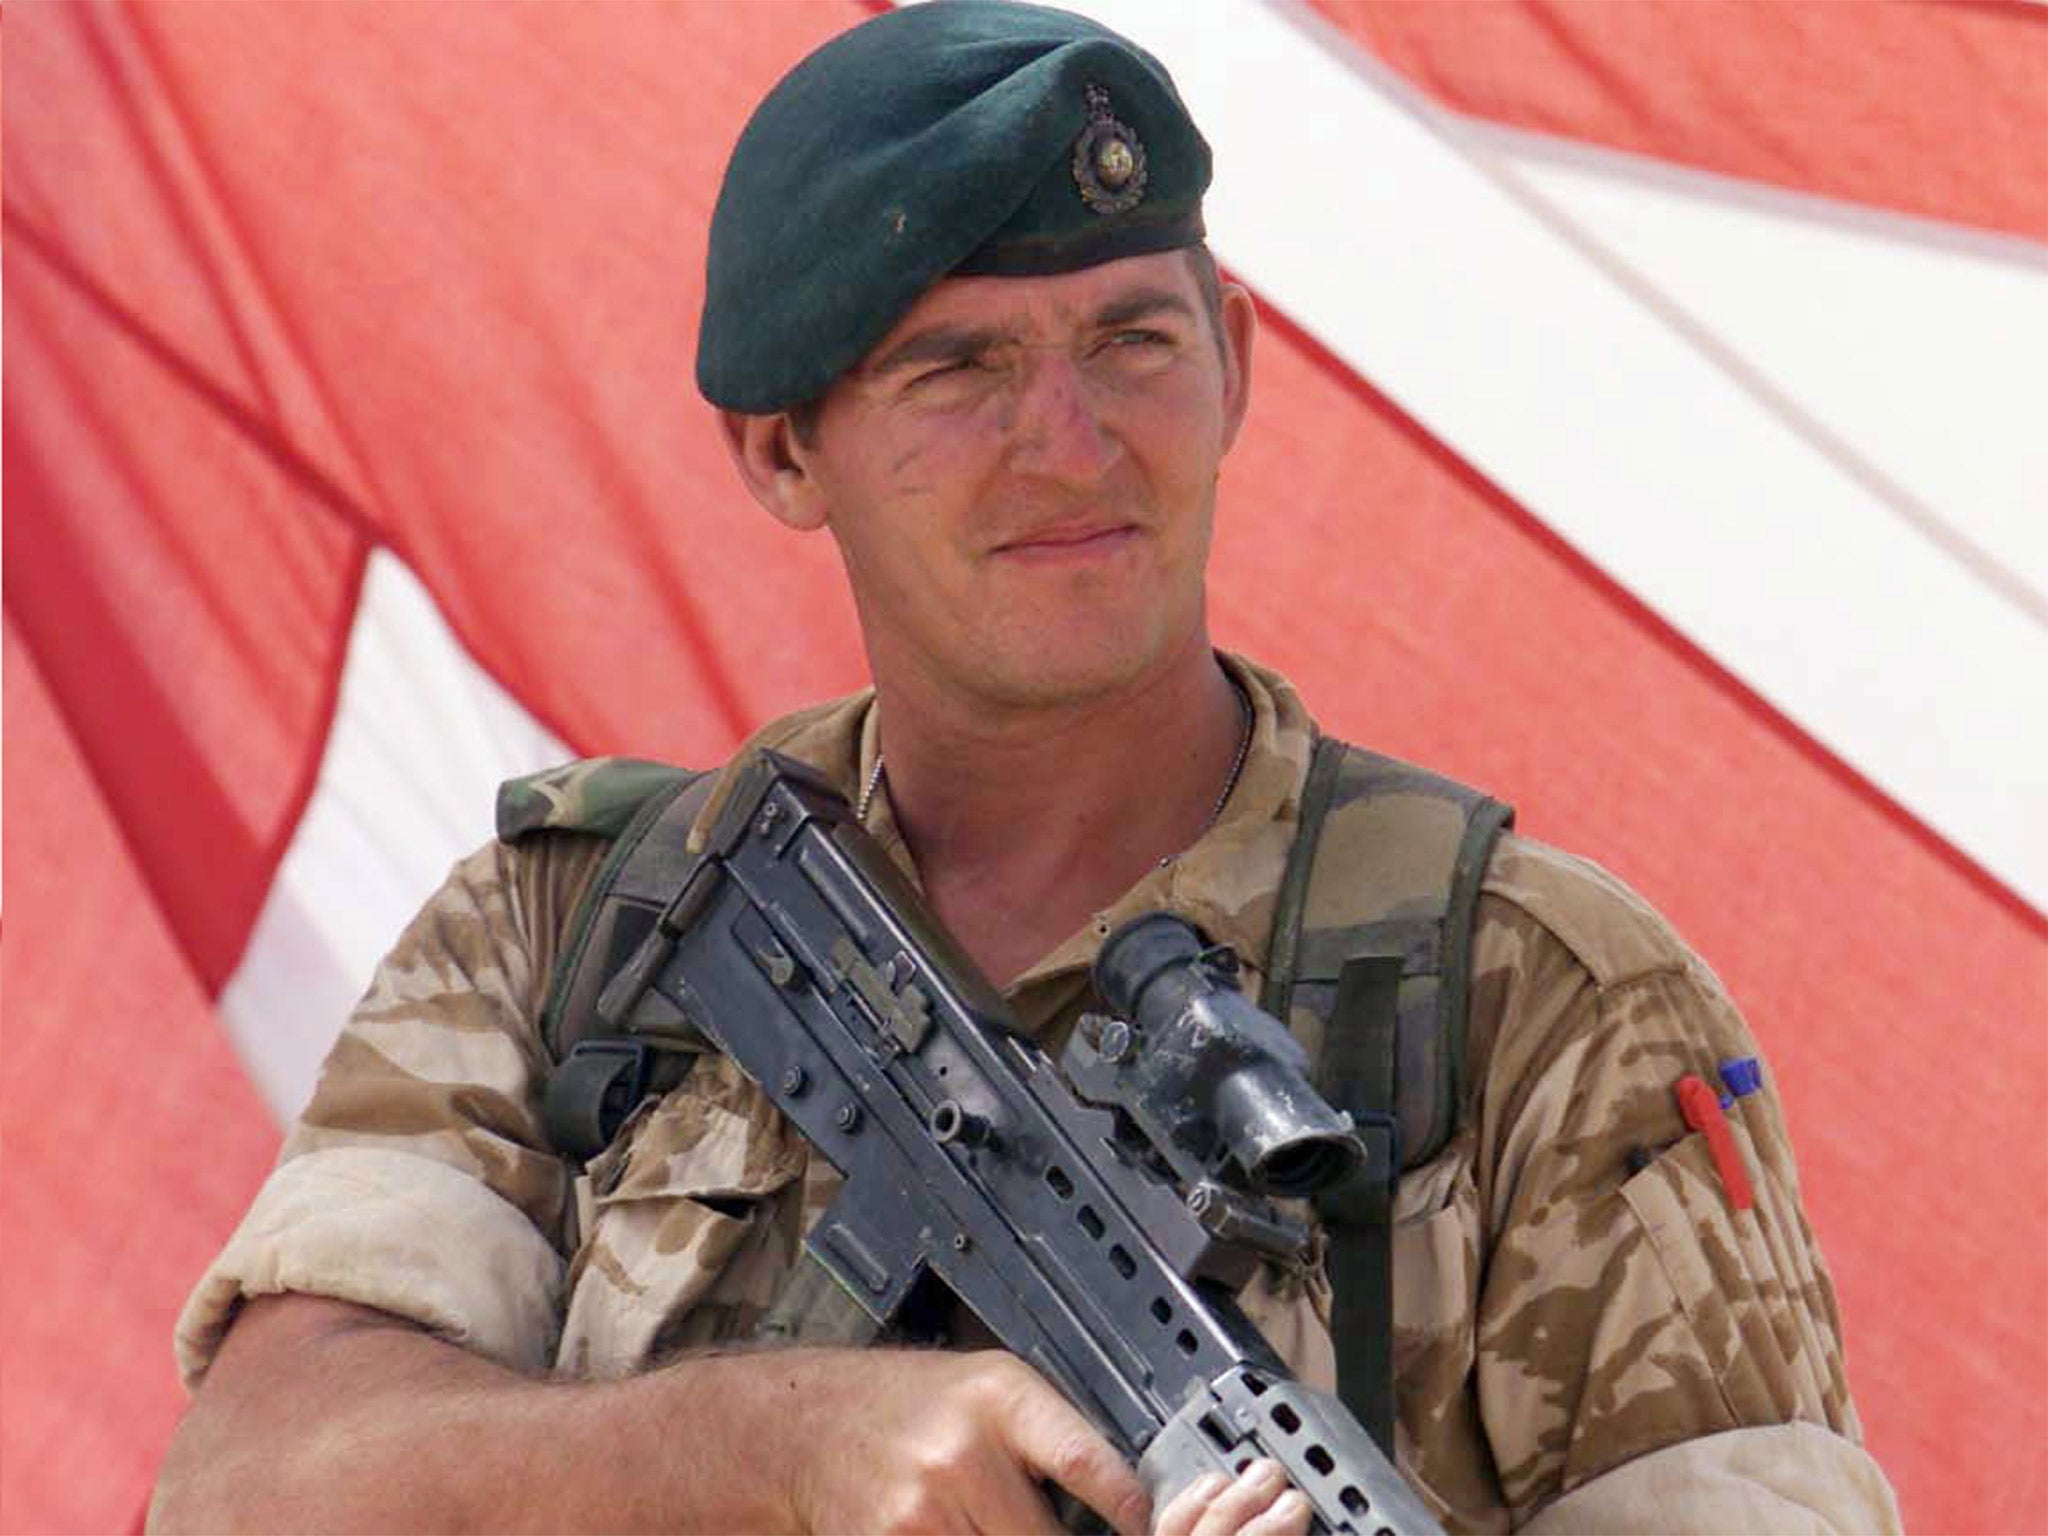 Sergeant Alexander Blackman was convicted of murdering an injured Afghan fighter in Helmand province in 2011